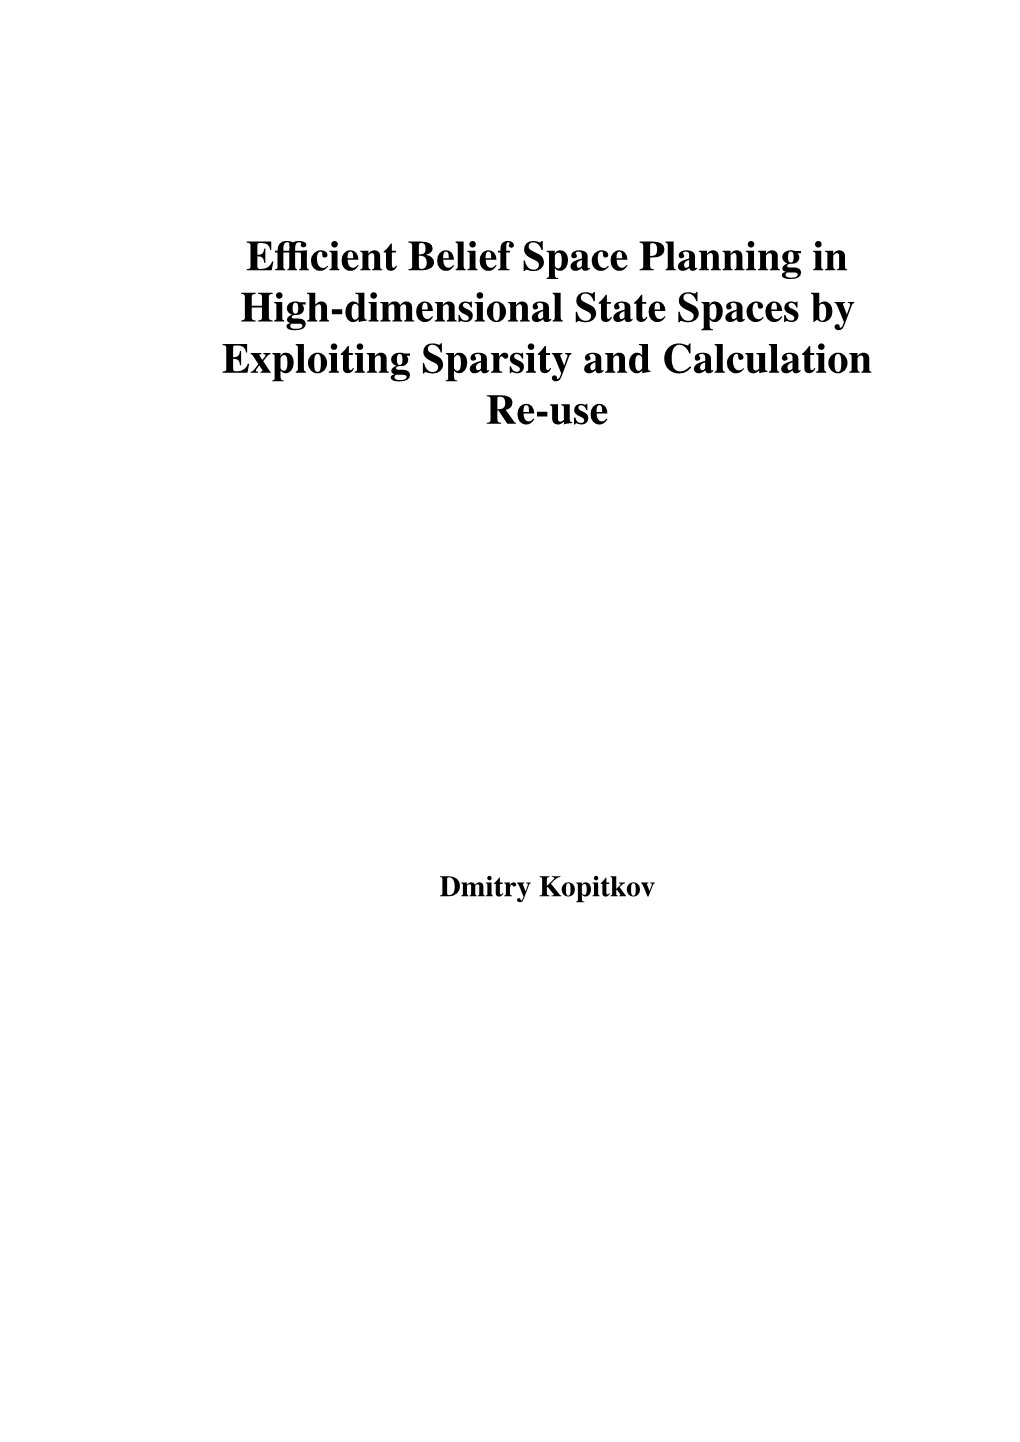 Efficient Belief Space Planning in High-Dimensional State Spaces By